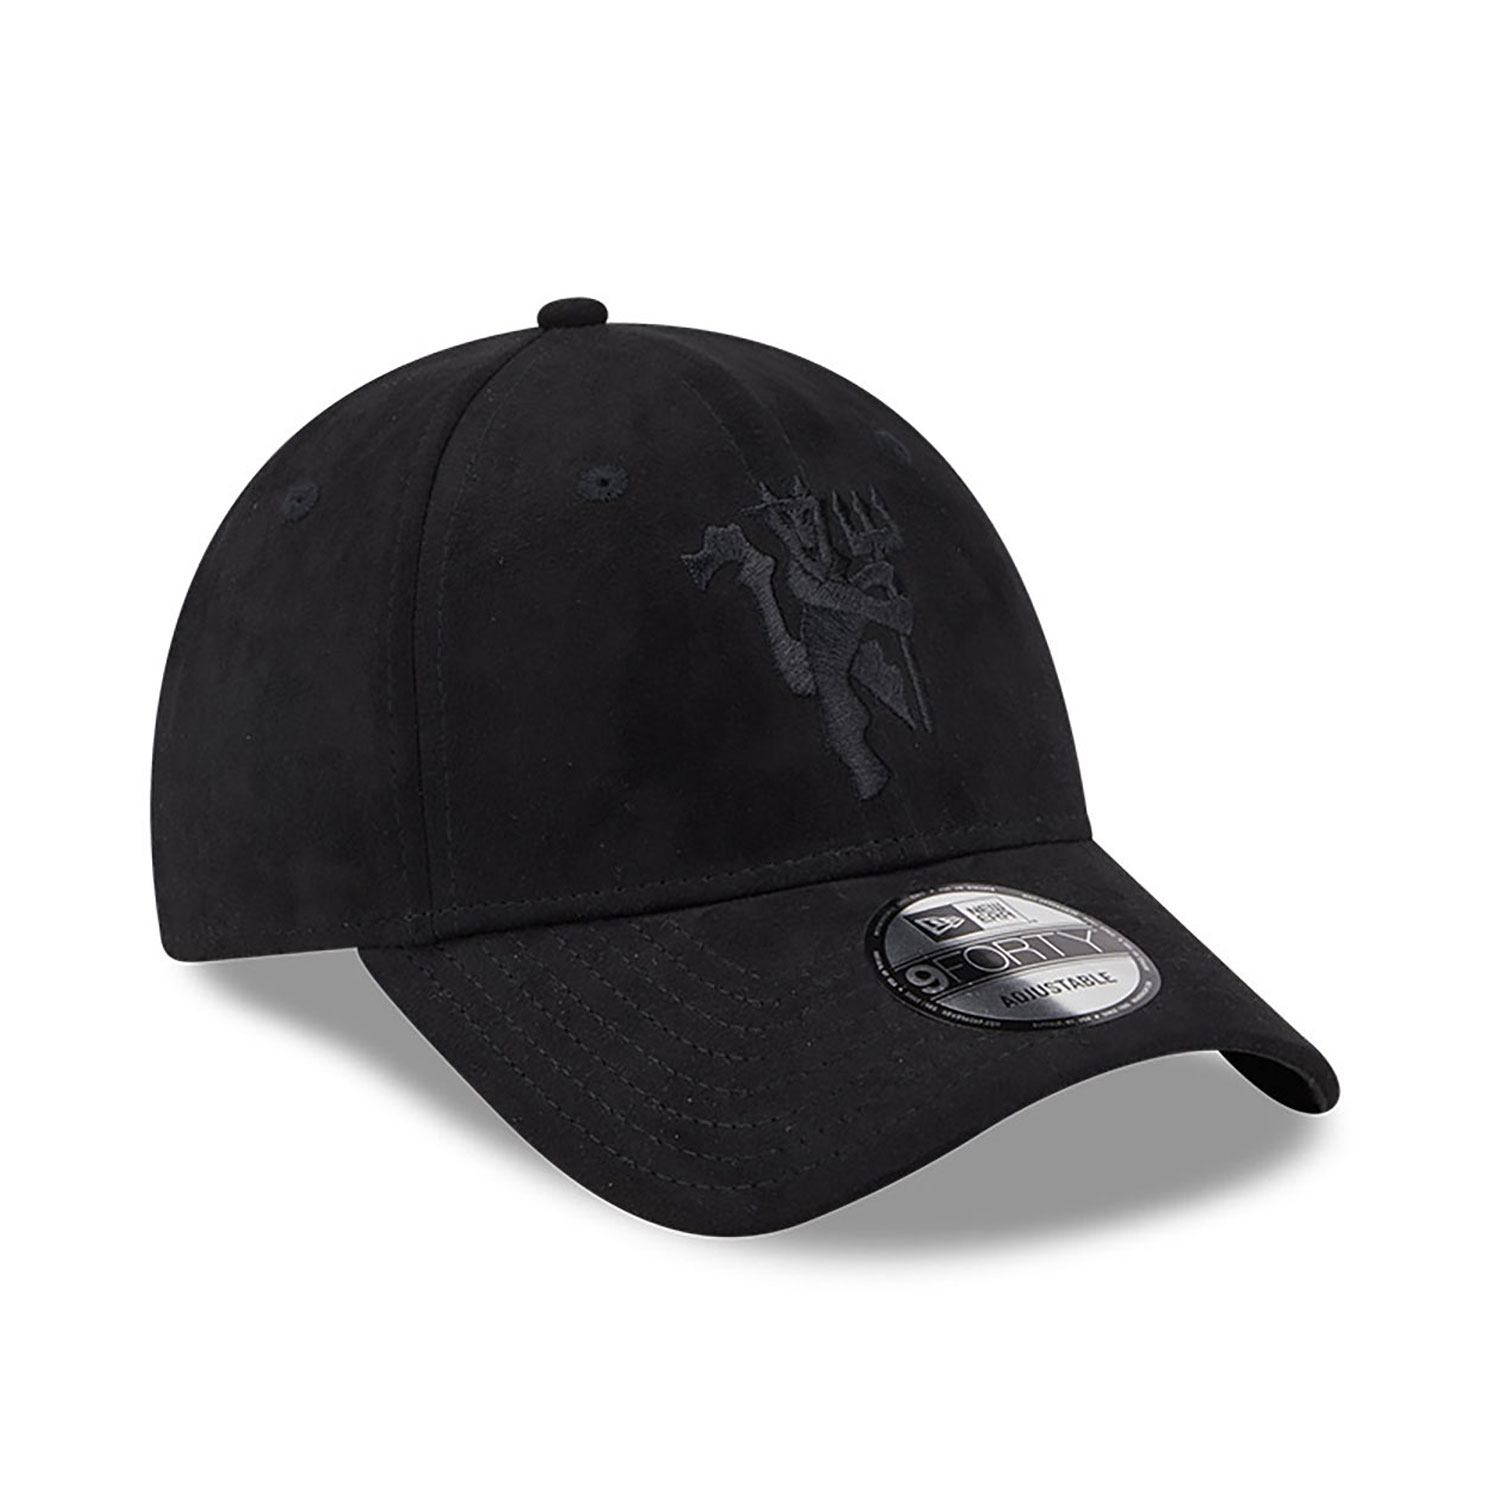 Manchester United FC Womens Black 9FORTY Adjustable Cap